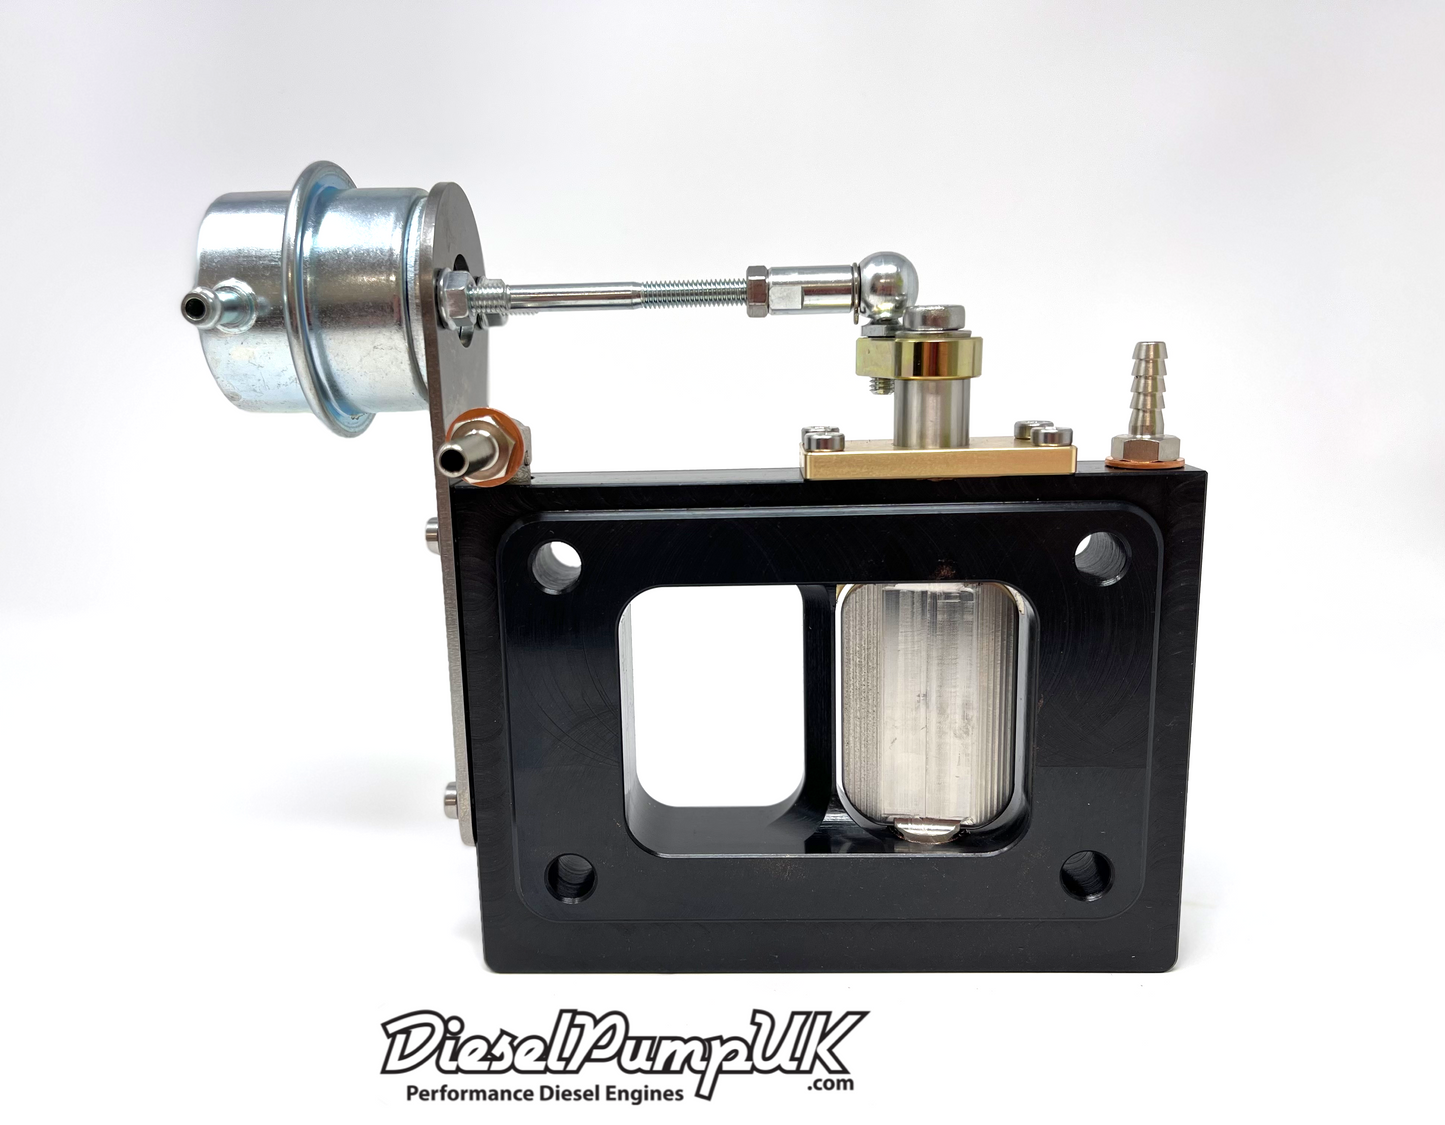 Quick Spool Valve V2 – Water cooled